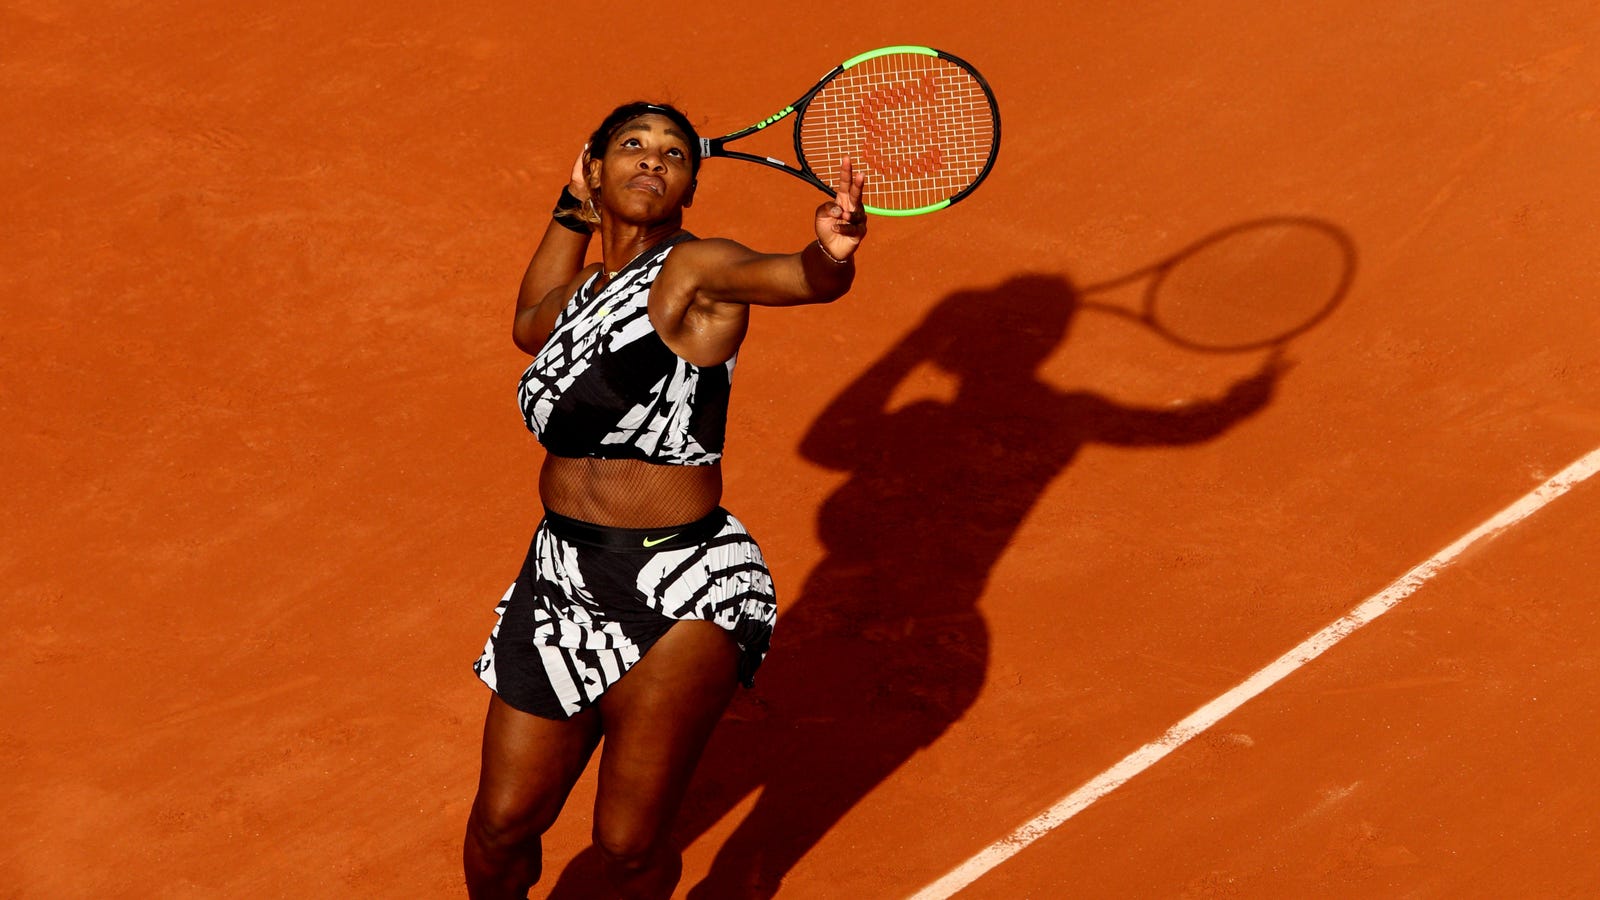 Serena Williams Wore a Hot Outfit to 